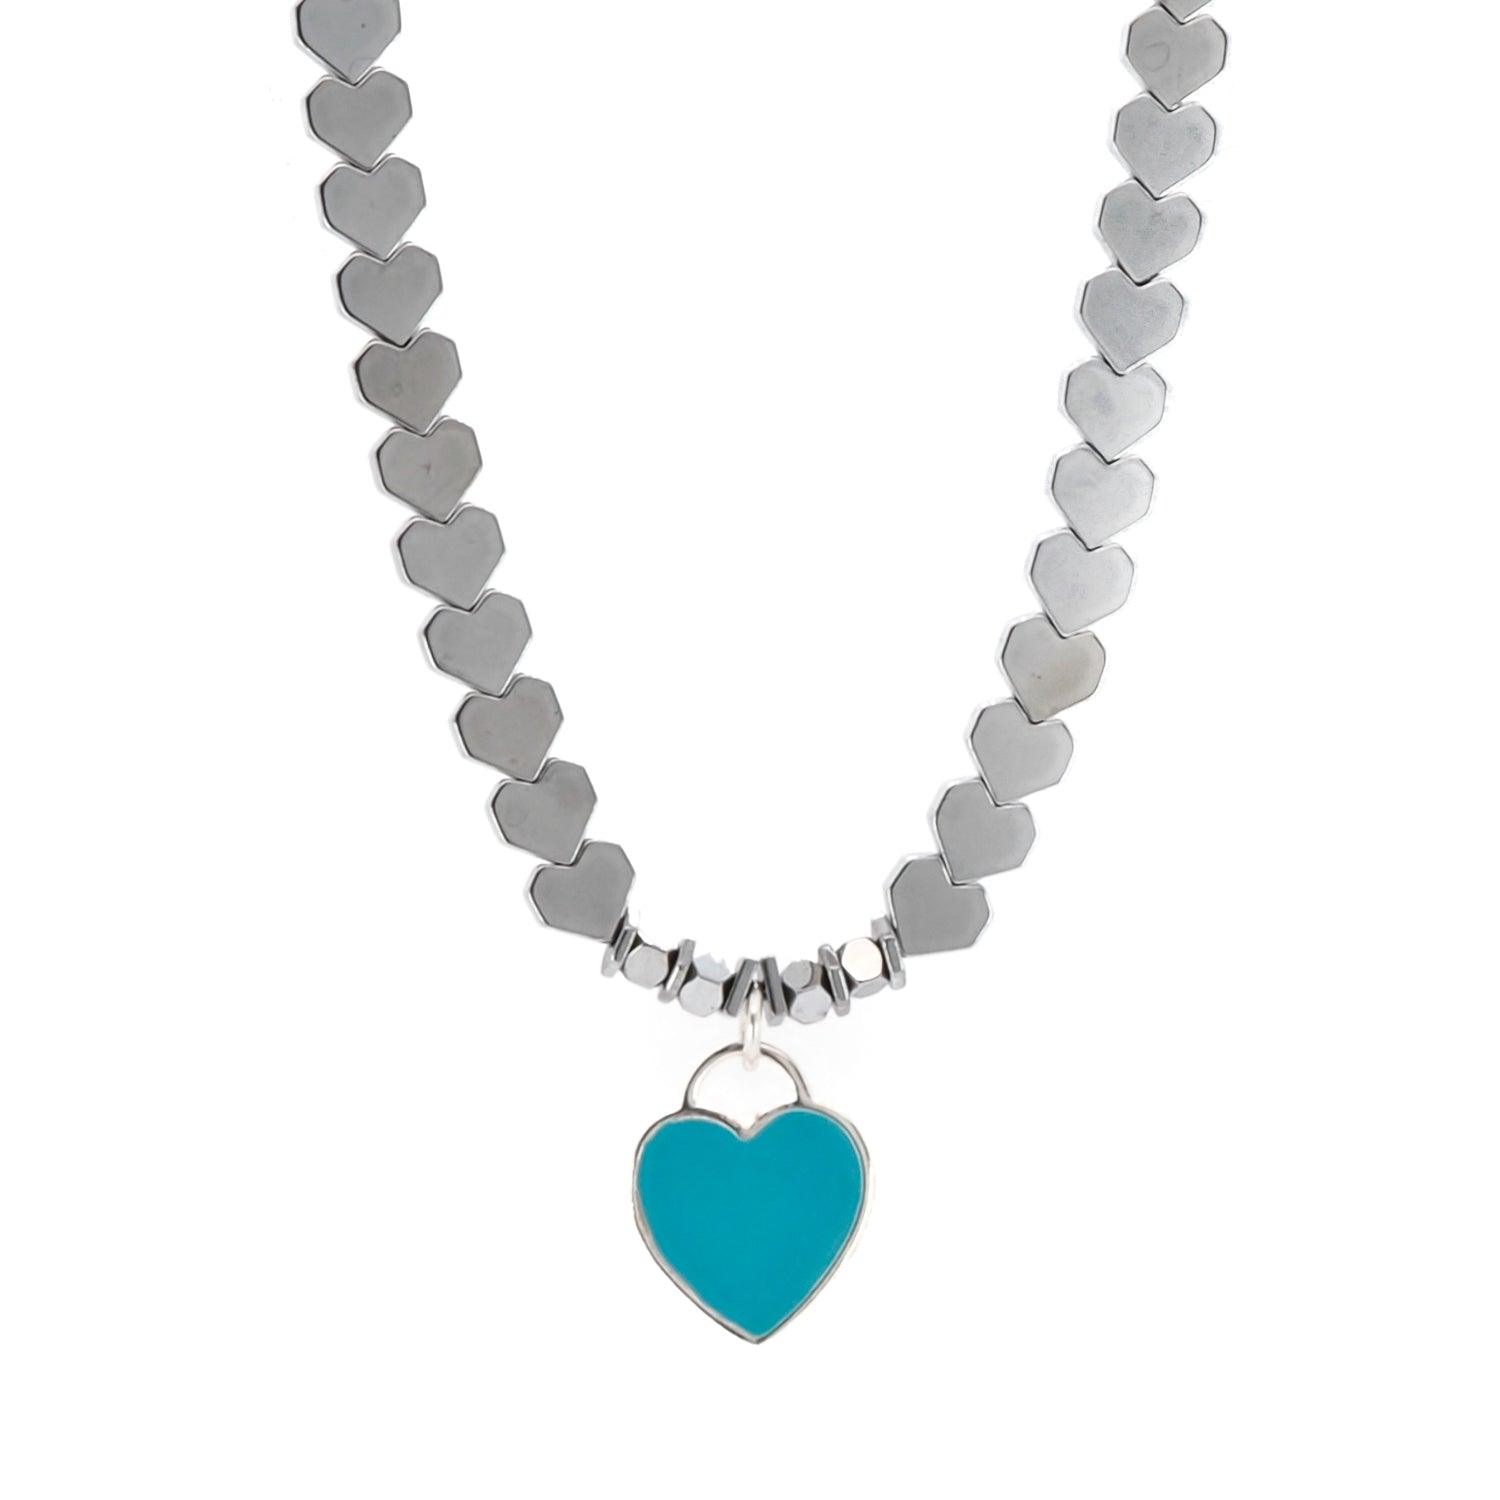 Turquoise Heart Pendant Silver Hematite Stone Heart Shape Chain Necklace featuring silver hematite beads and a turquoise enamel heart charm